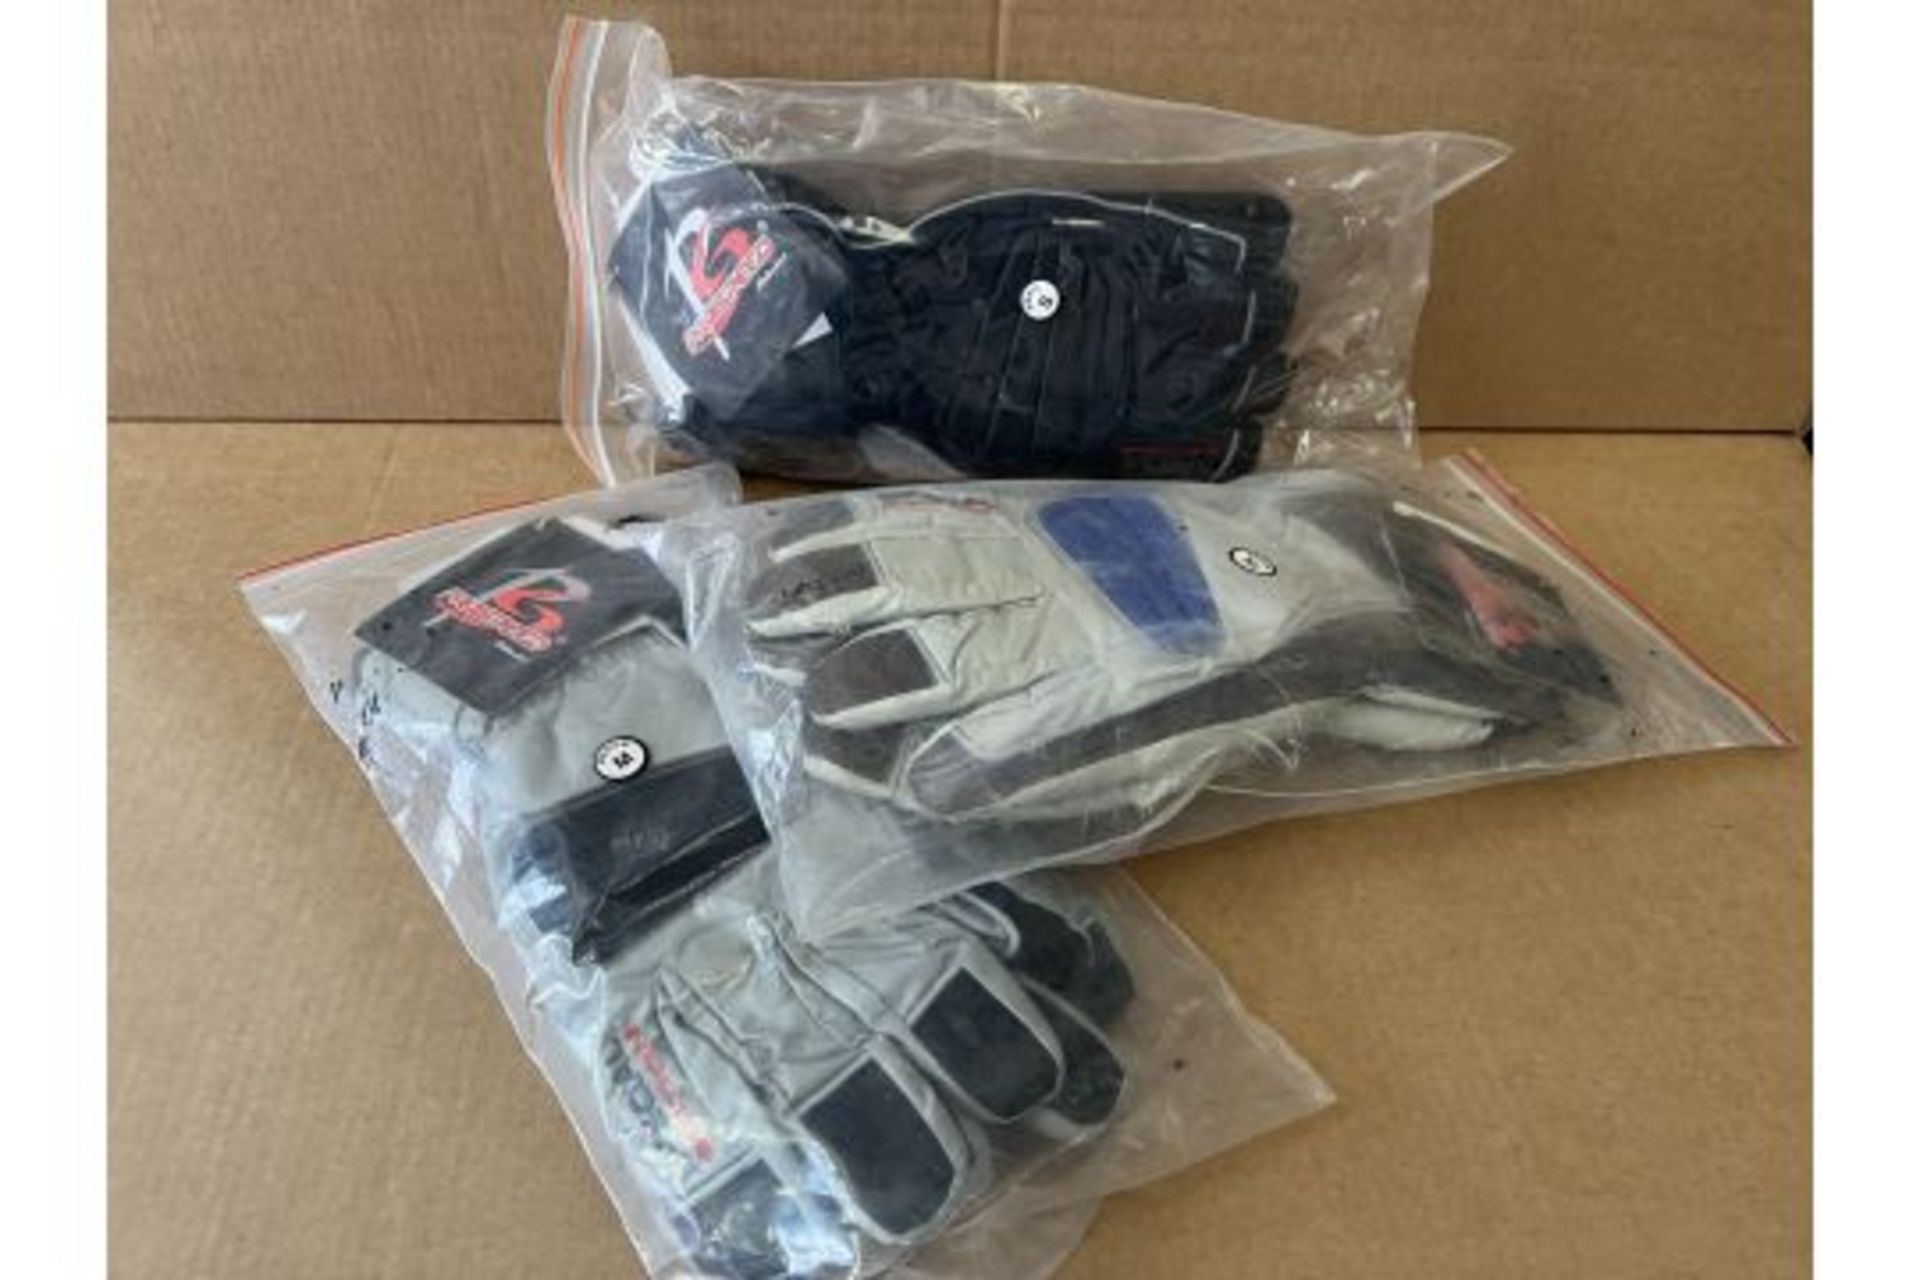 12 X BRAND NEW ASSORTED PRO SPEED HIPORA 3M PROFESSIONAL MOTORBIKE GLOVES IN VARIOUS SIZES RRP £25